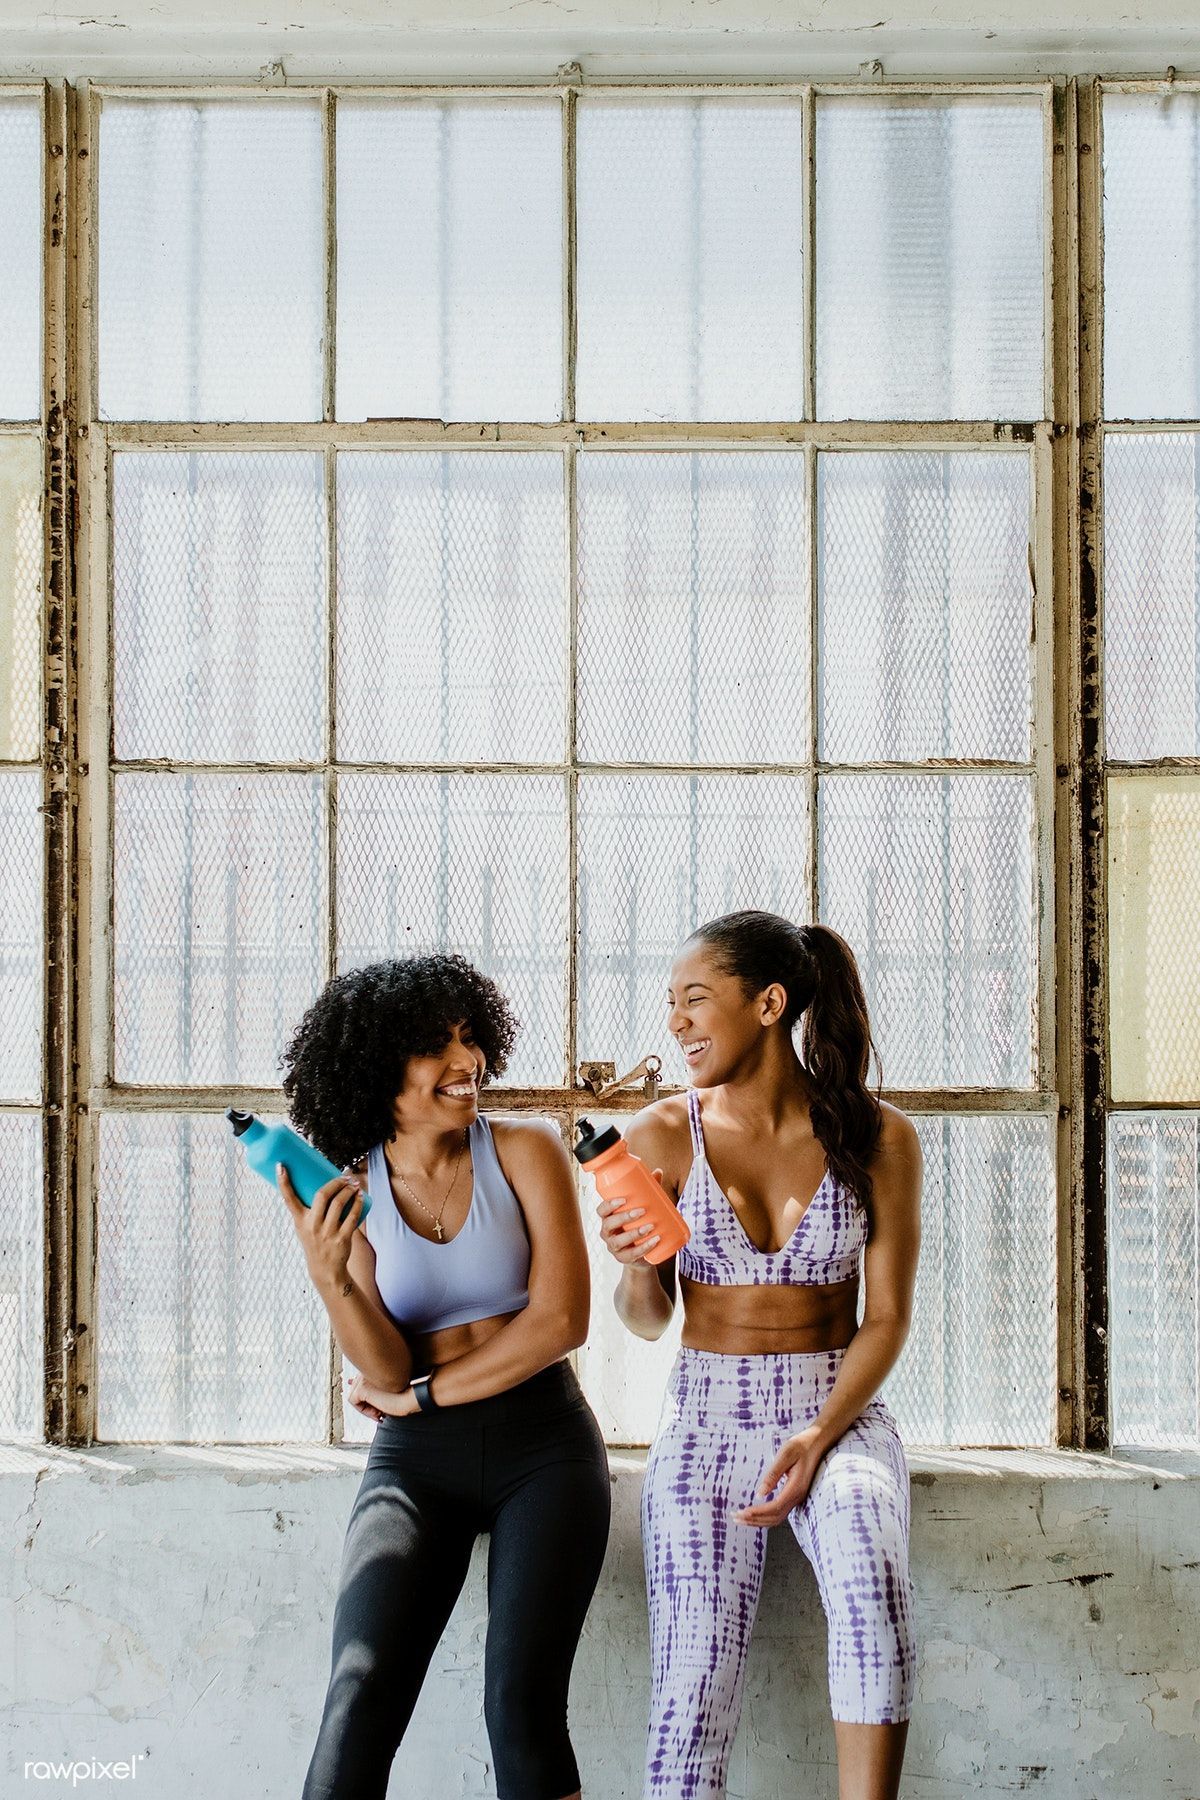 Download premium image of Sportive women talking in a gym while drinking - Download premium image of Sportive women talking in a gym while drinking -   9 fitness Photoshoot water ideas